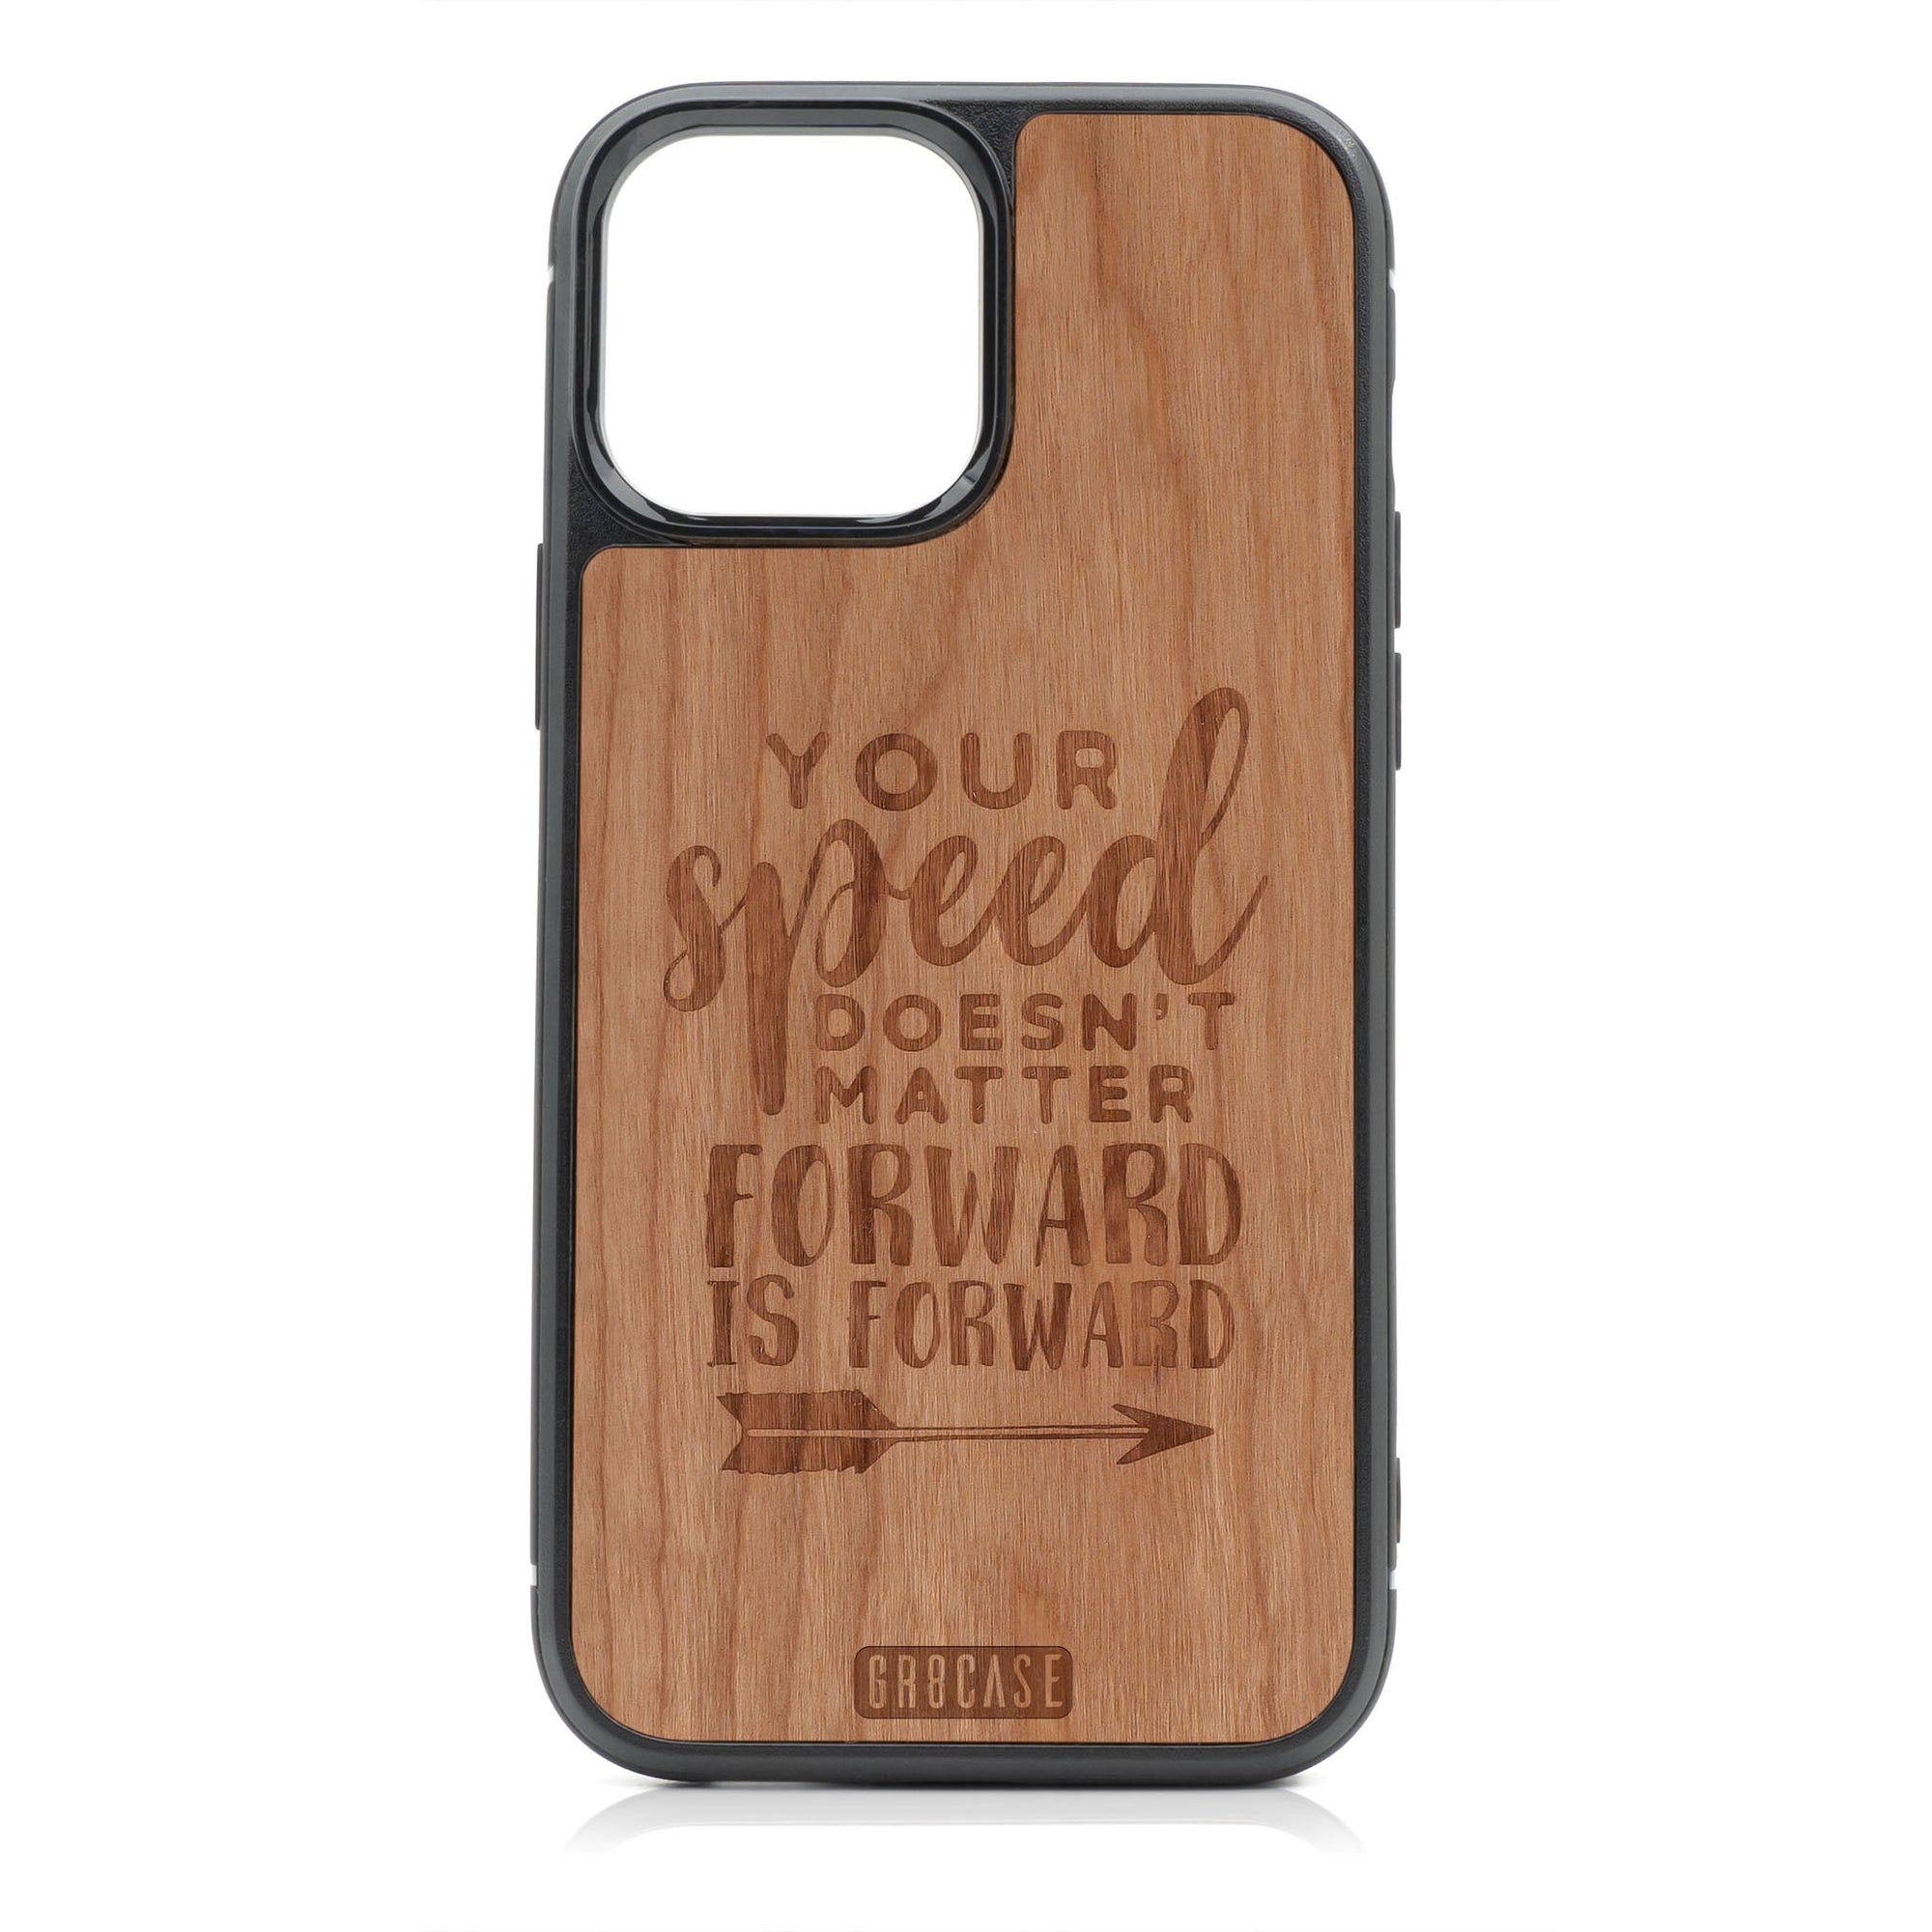 Your Speed Doesn't Matter Forward Is Forward Design Wood Case For iPhone 14 Pro Max